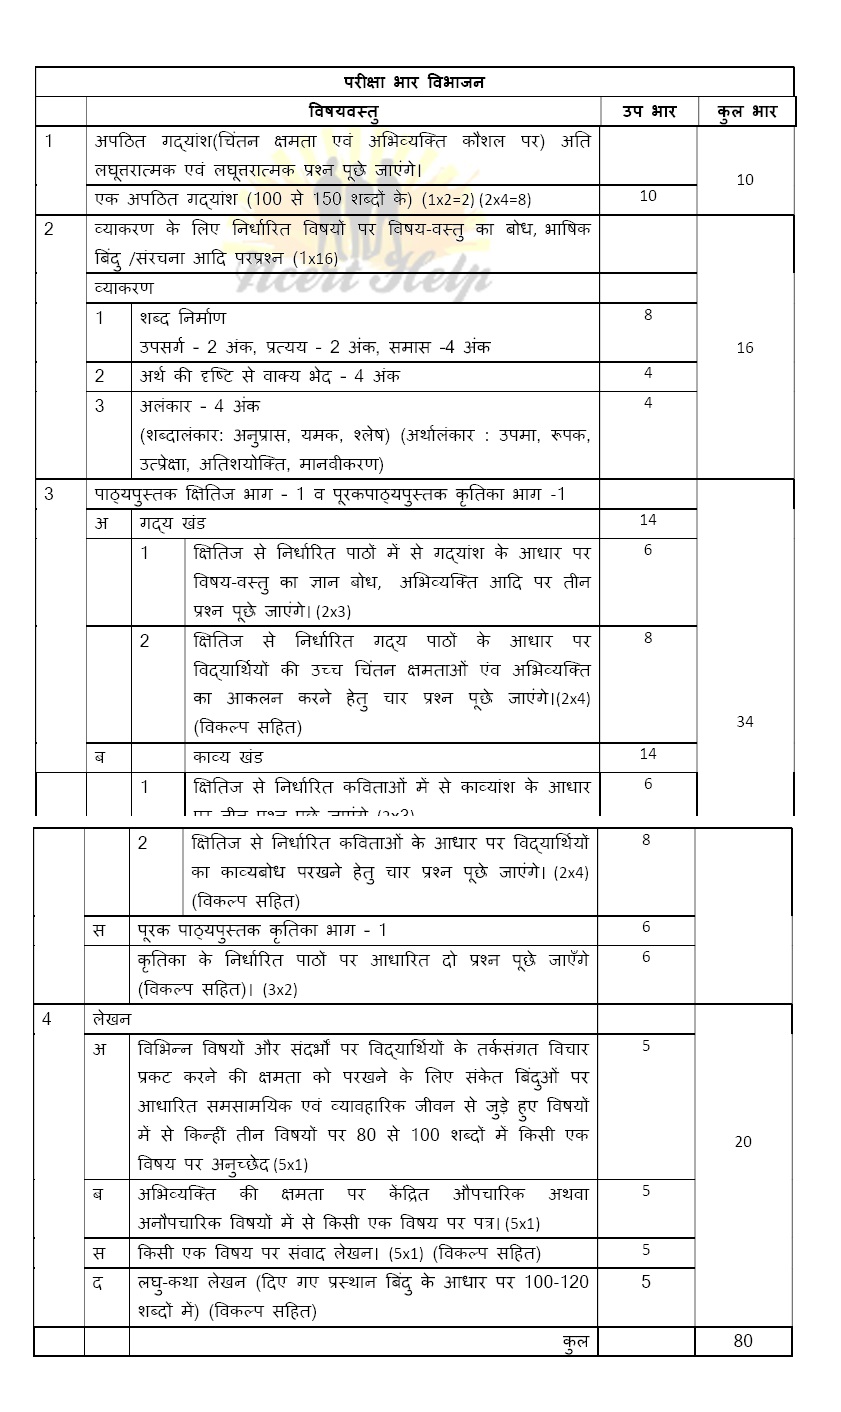 CBSE Syllabus for Class 9 Hindi Course 9th NCERT Pdf 2020 - 2021